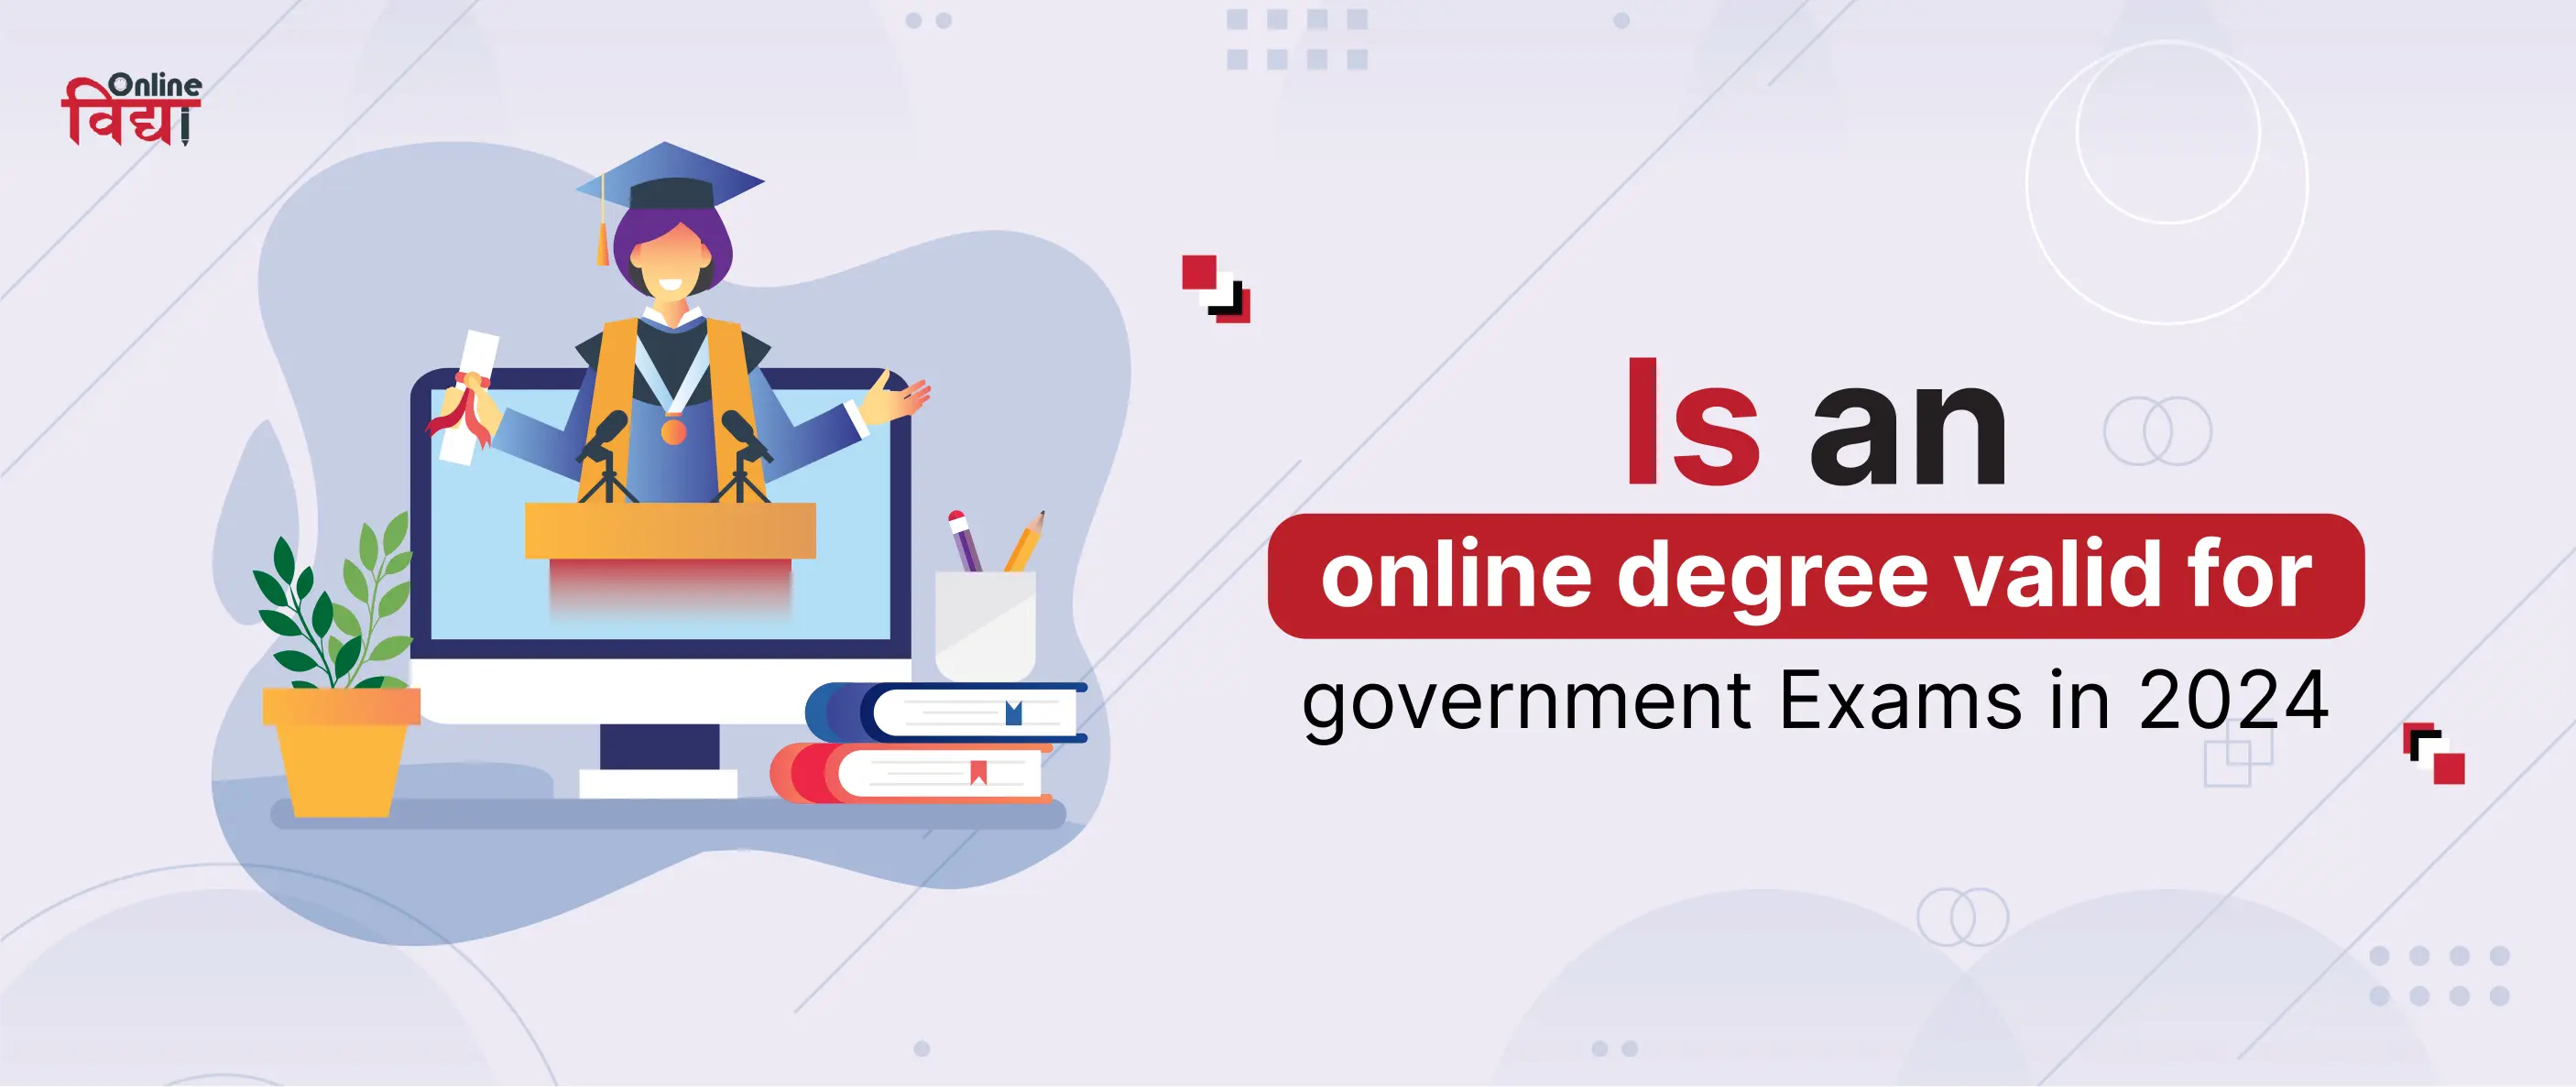 Is an online degree valid for government Exams in 2024